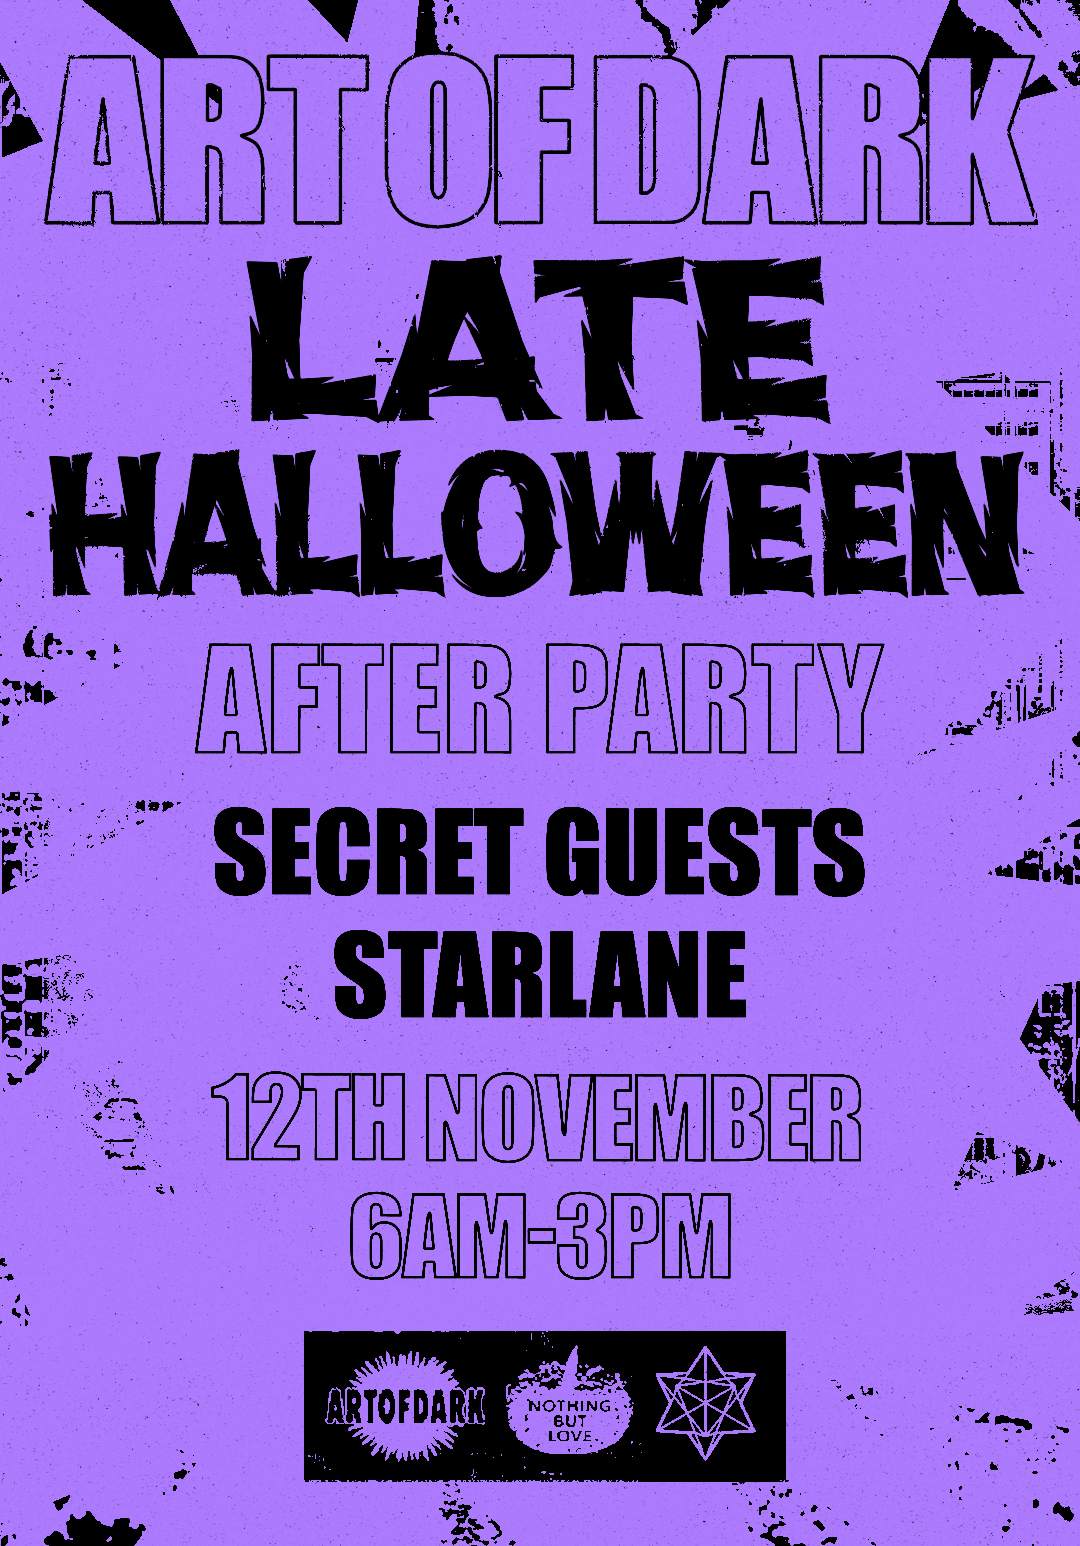 Art　Bar,　of　Starlane　Party　Late　Dark　Halloween　After　at　Pizza　London